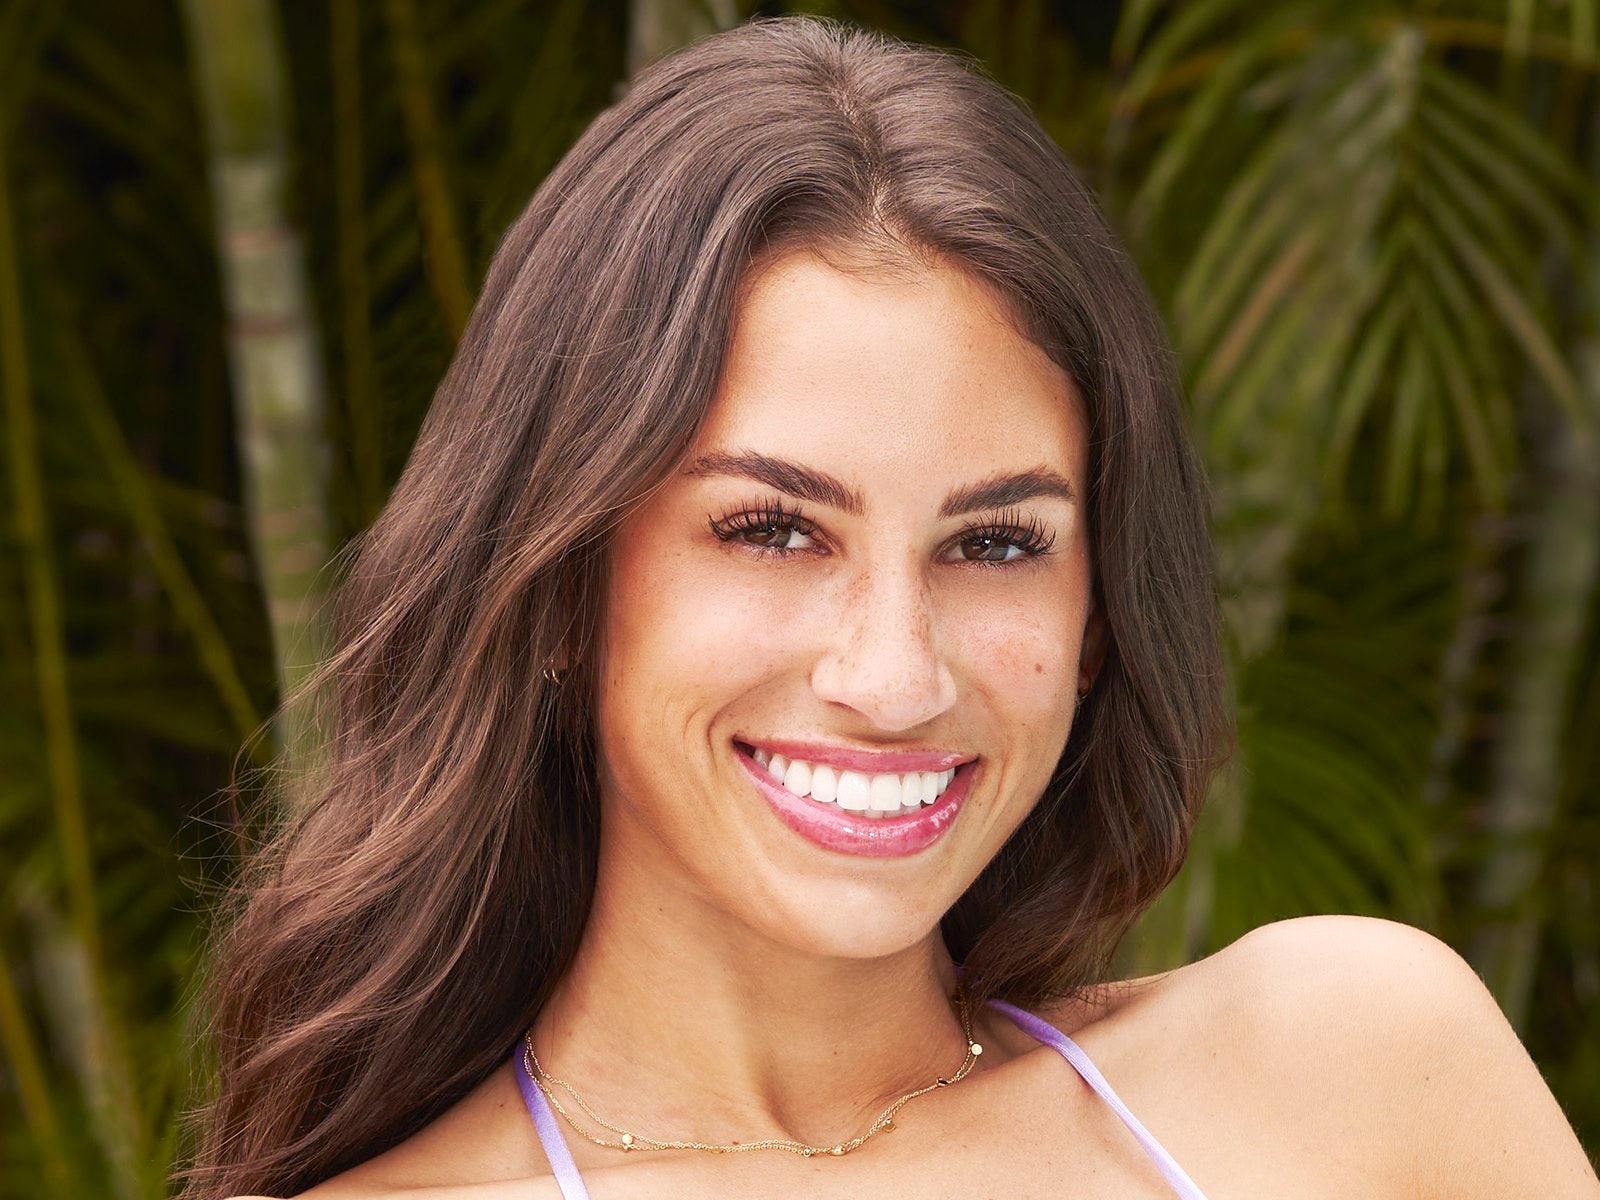 'Bachelor in Paradise' star Genevieve Parisi I wasn't playing games